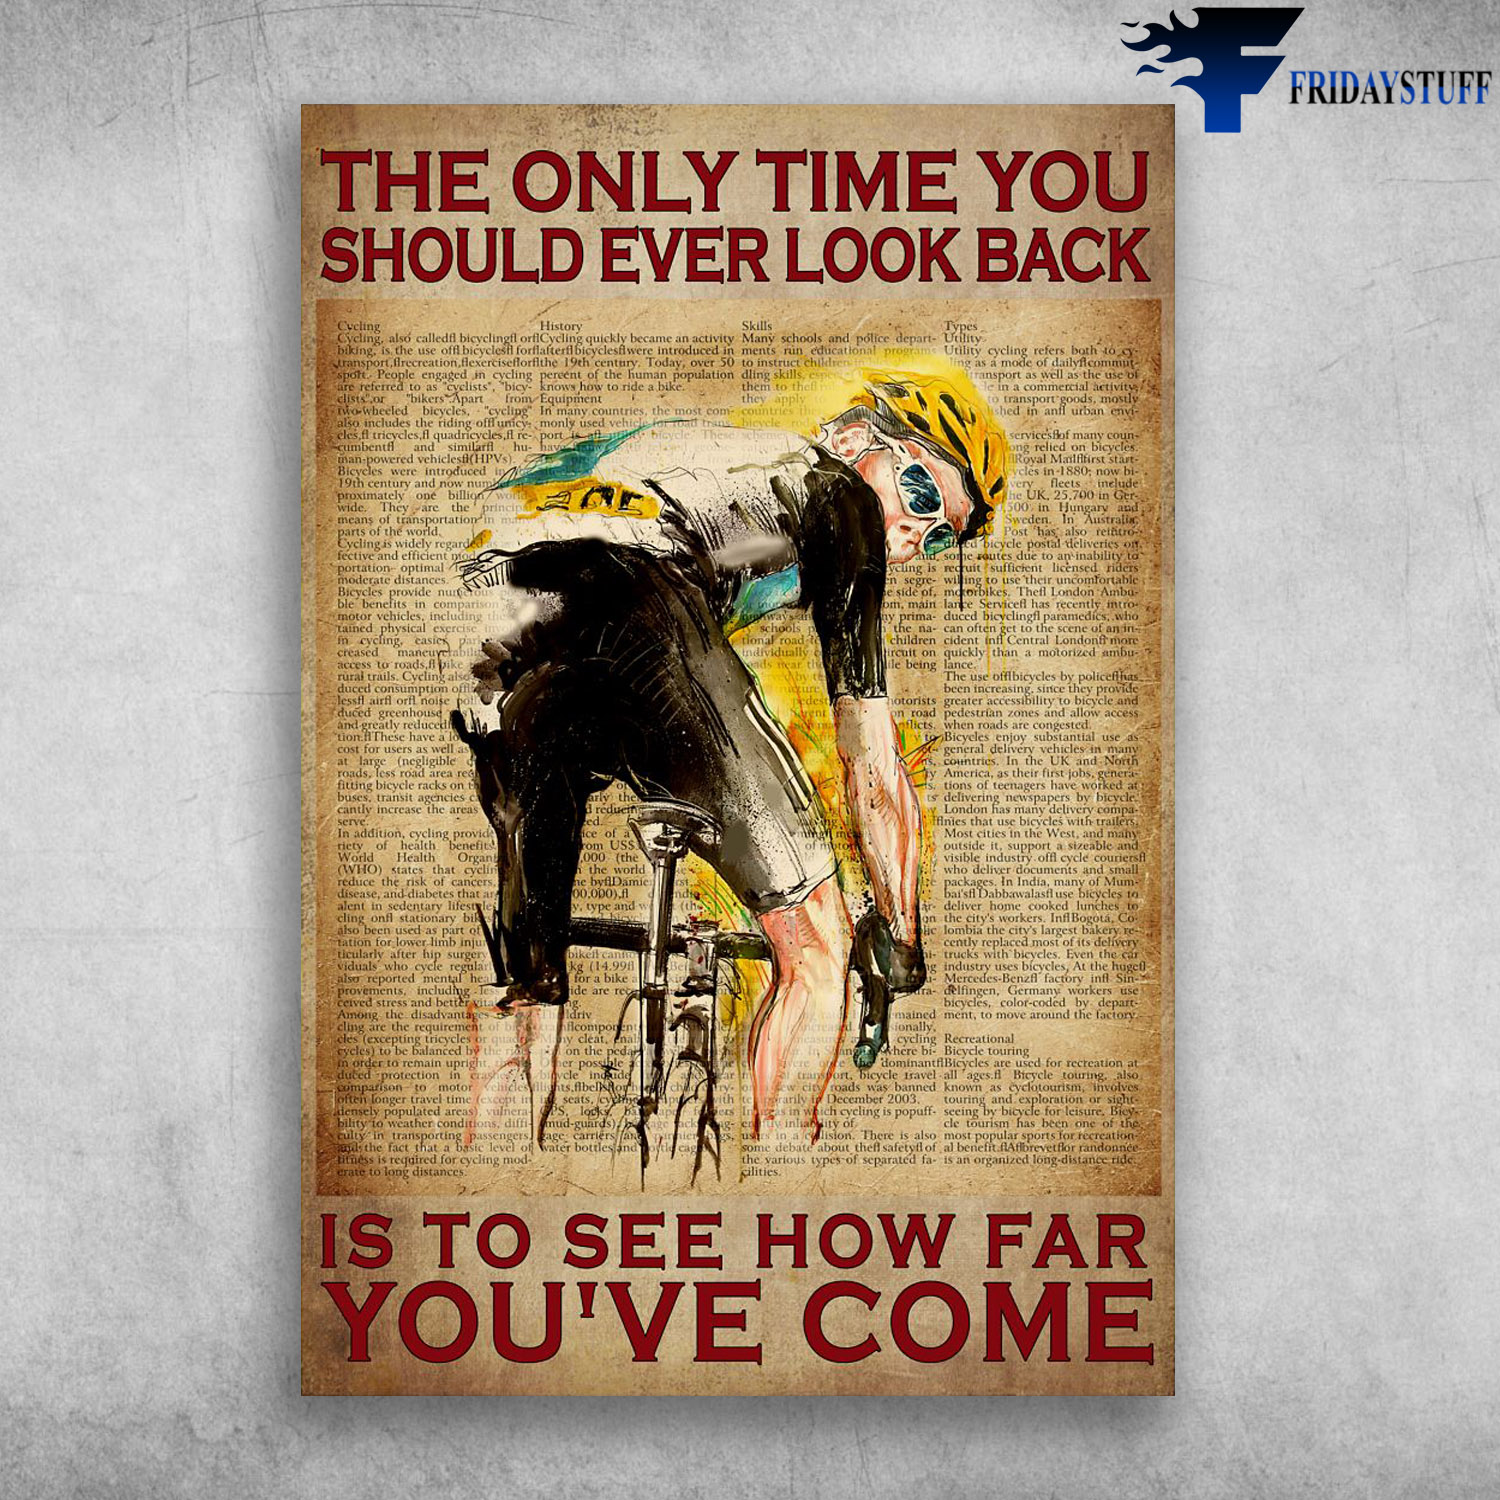 Man Cycling - The Only One Time You Should Ever Look Back, Is To Tee How Far You've Come